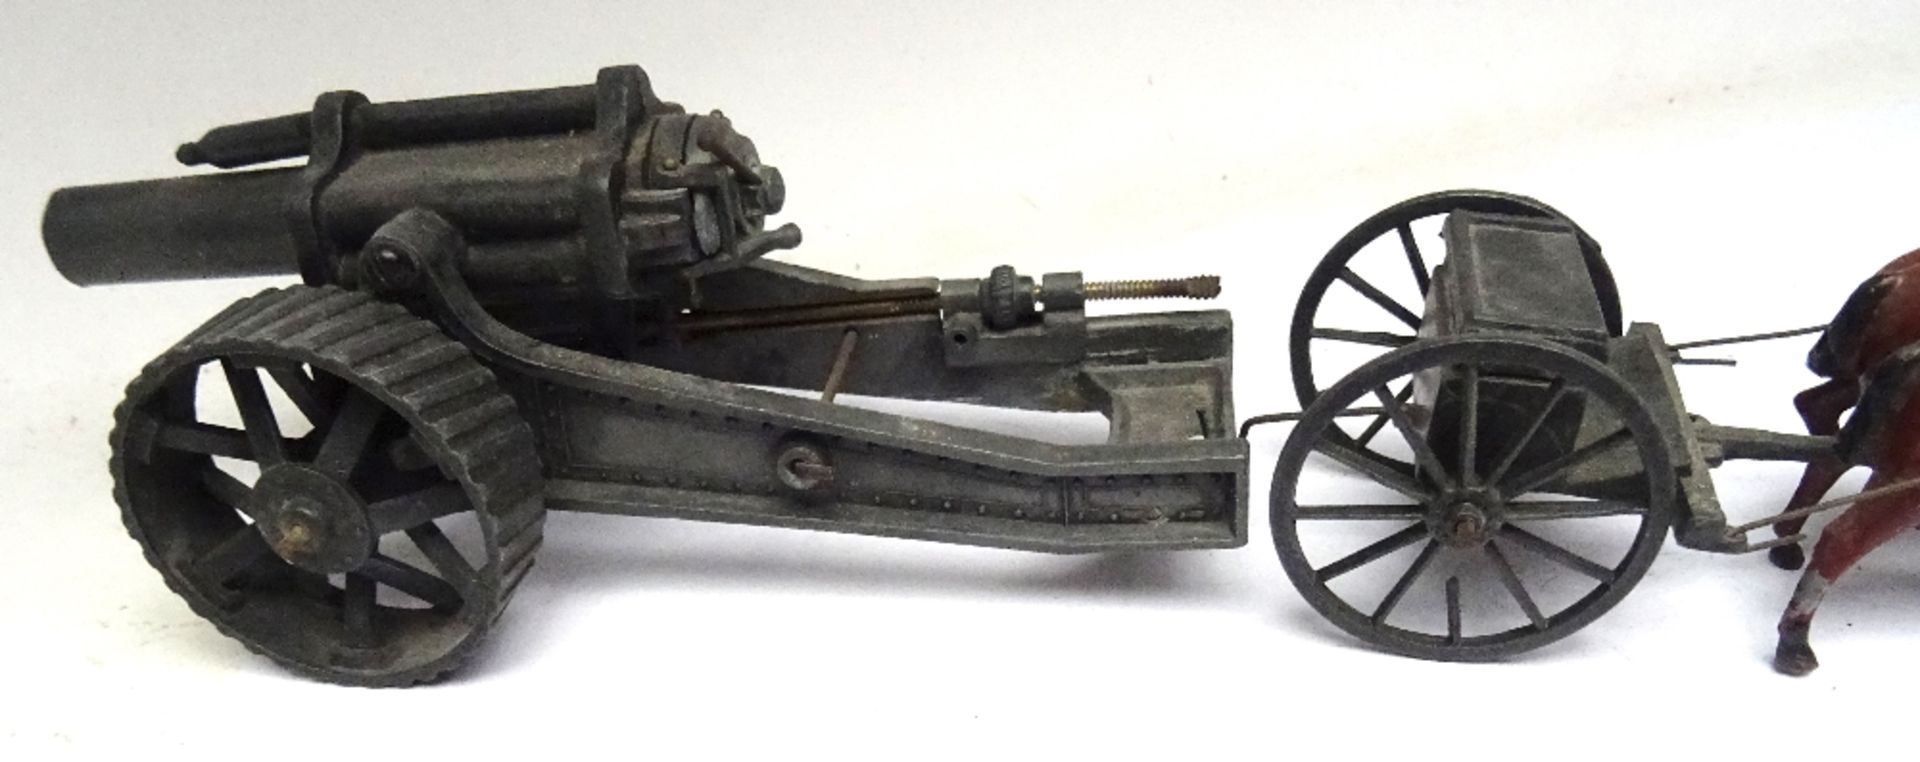 Britains set 211, 18inch Heavy Howitzer - Image 2 of 12